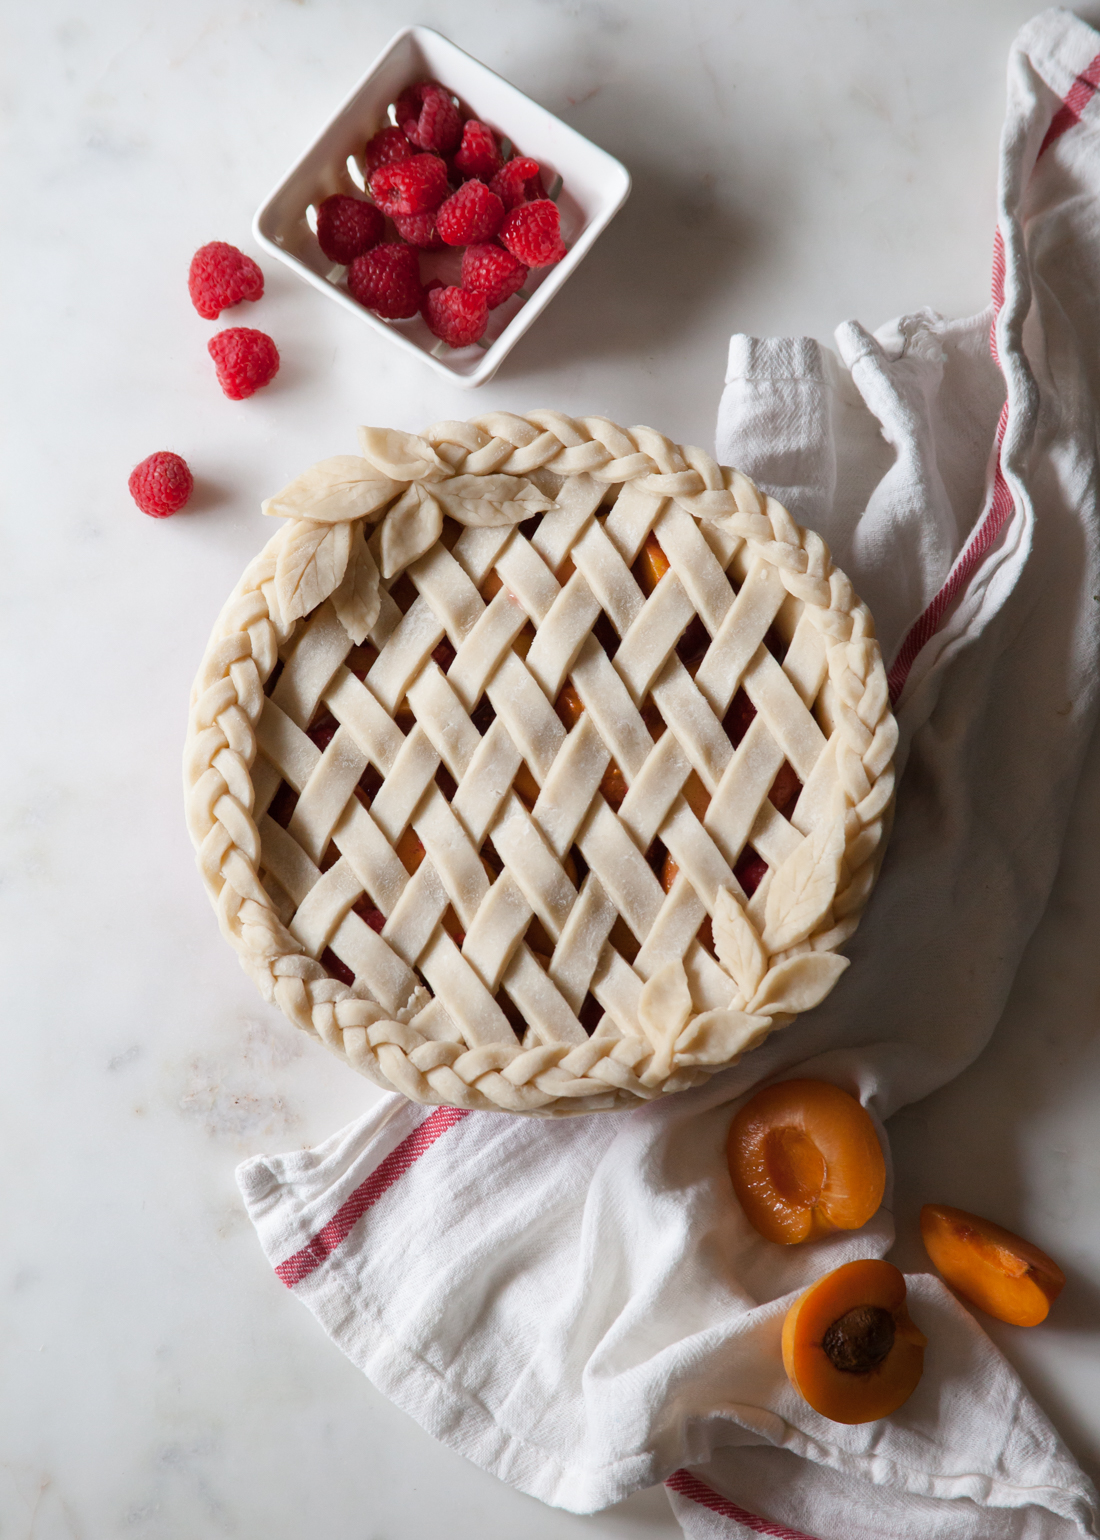 Apricot Raspberry Pie with an all butter crust and braided, lattice design.